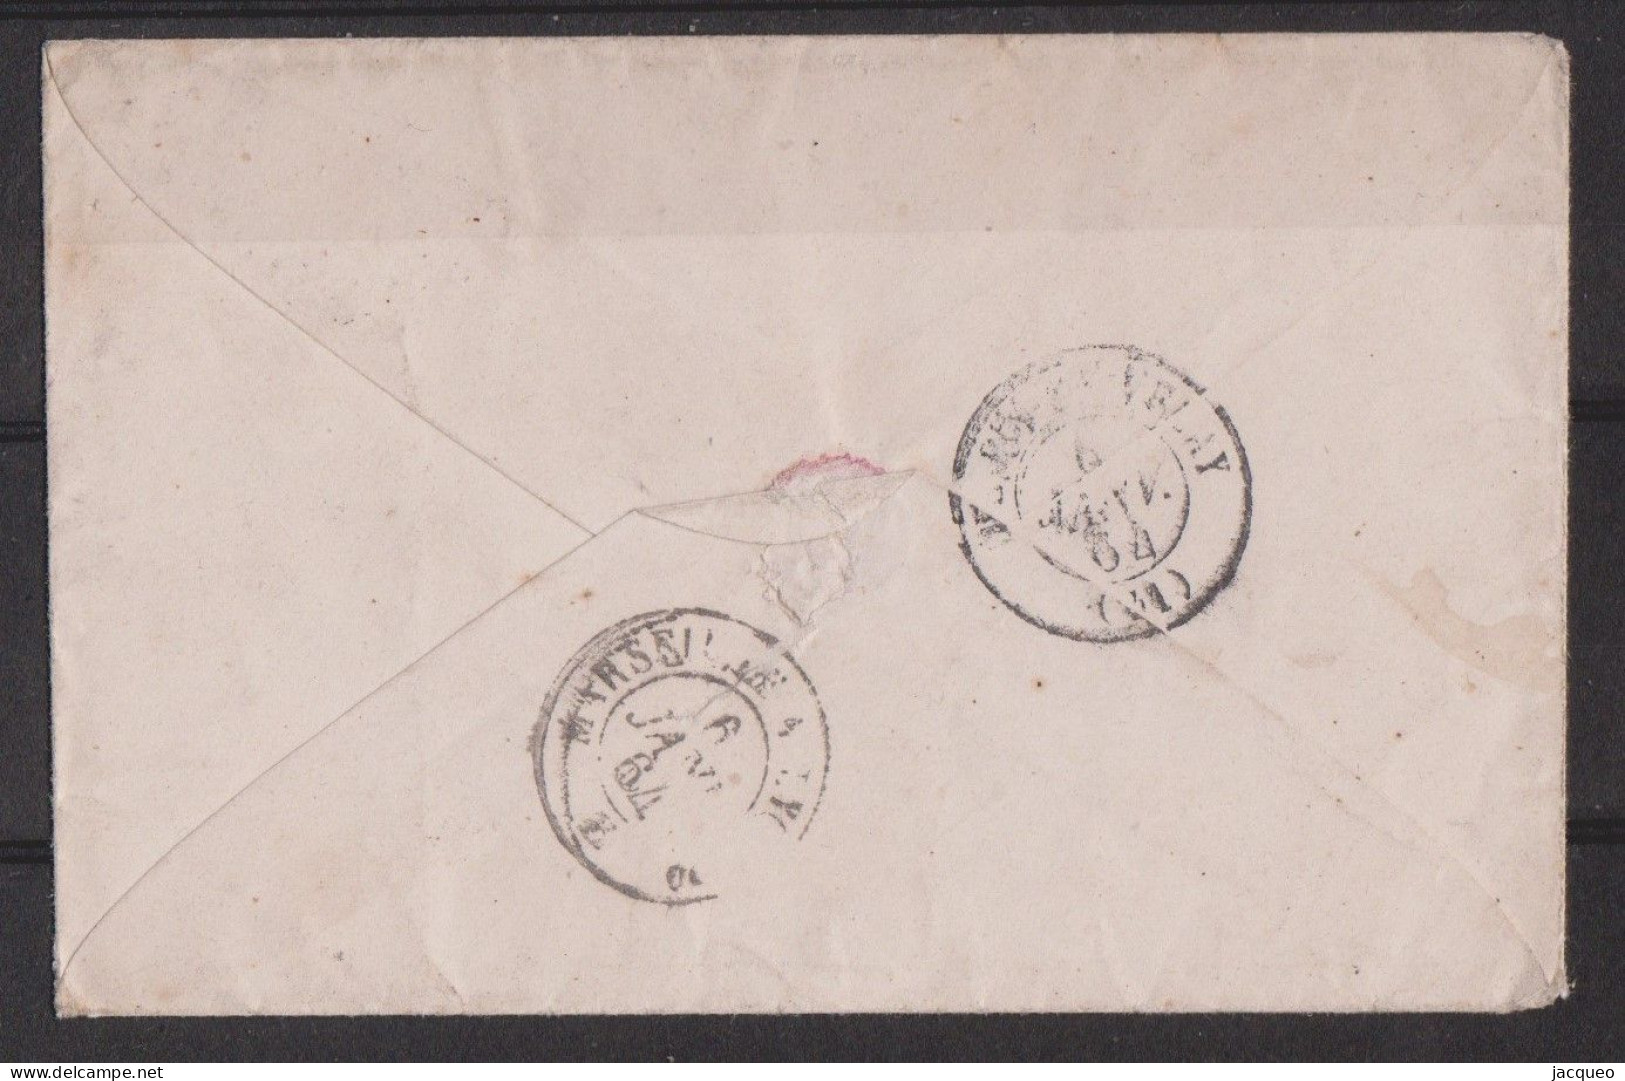 FRANCE N°13A - N°14 - N°14A -16A 1856-1860 NAPOLEON III  4 TIMBRES  + LETTRE N°14 ANNOHAY  VOIR SCAN - 1853-1860 Napoleone III